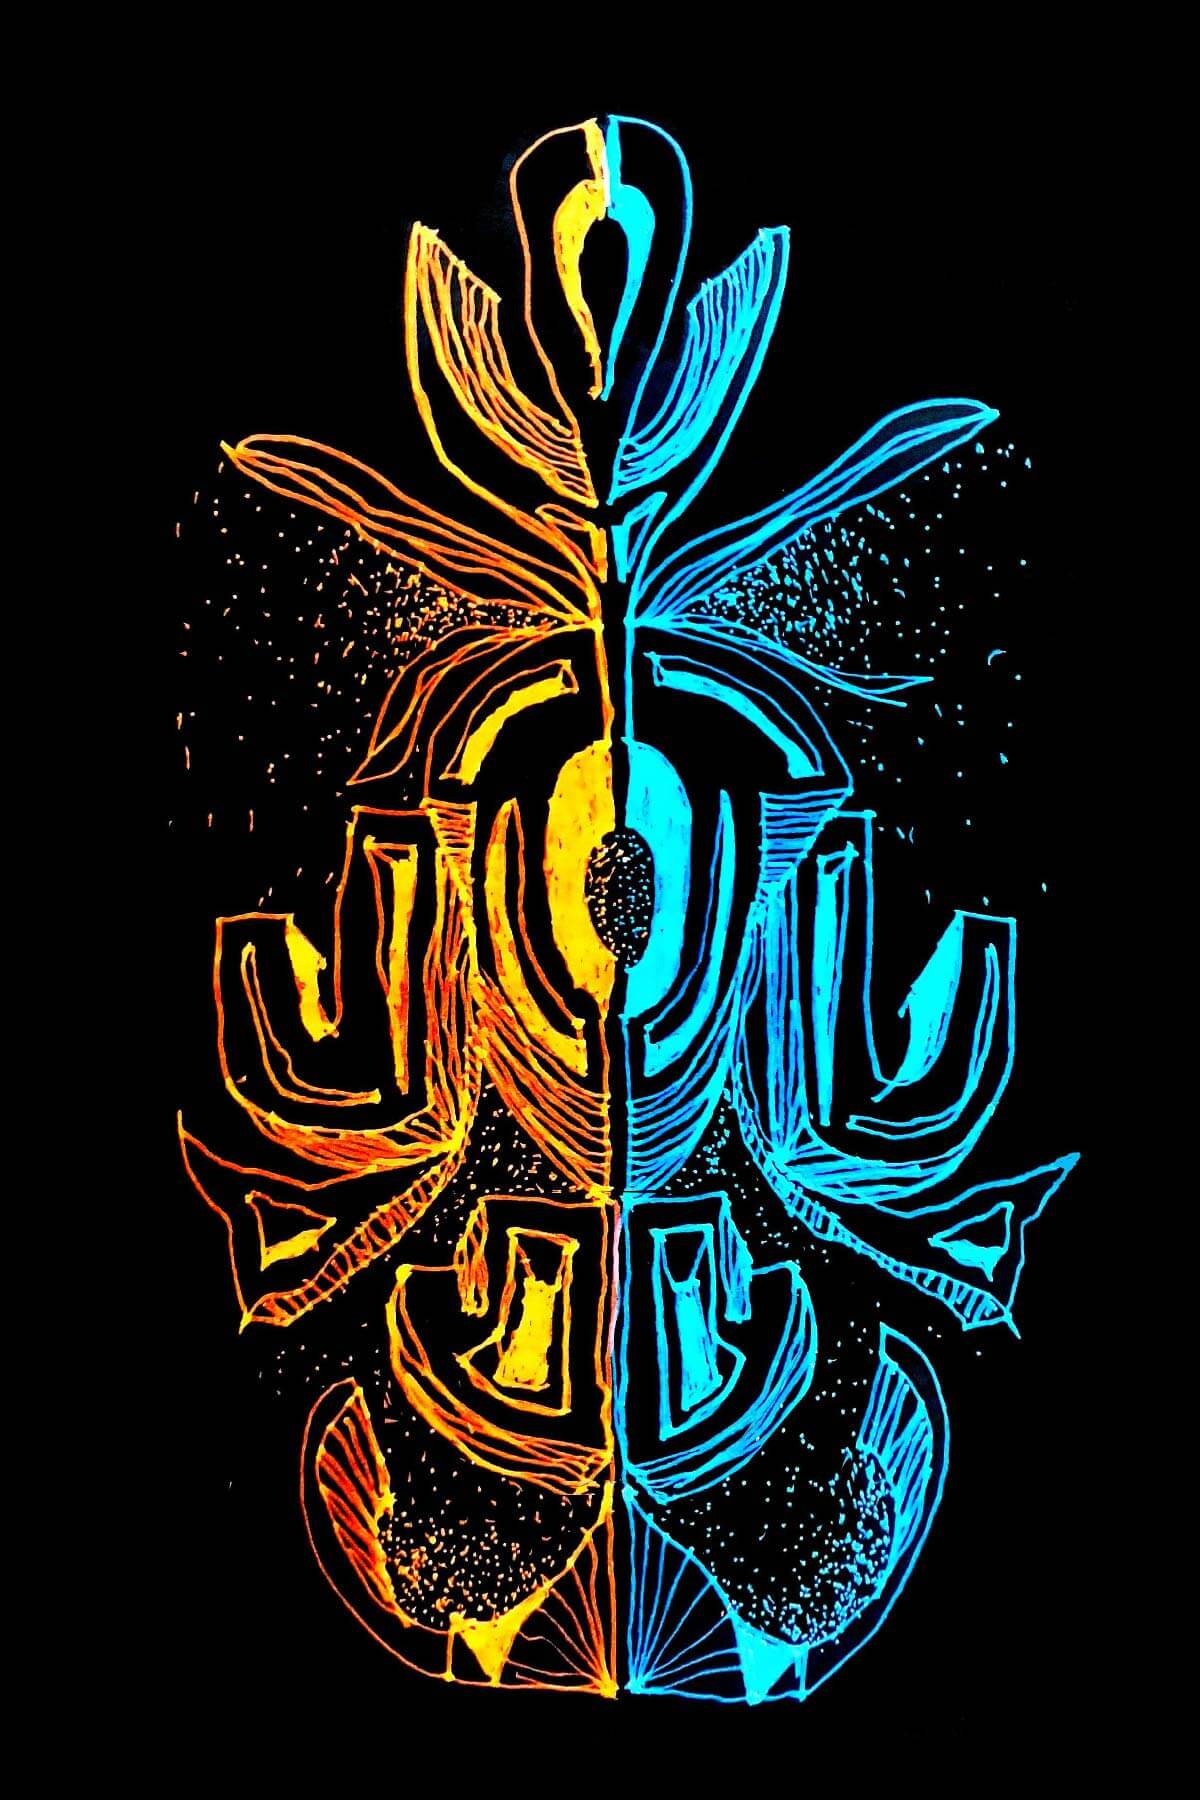 A black background with an abstract symmetrical line drawing comprised of yellow and orange lines on the left half and bright blue lines on the right.